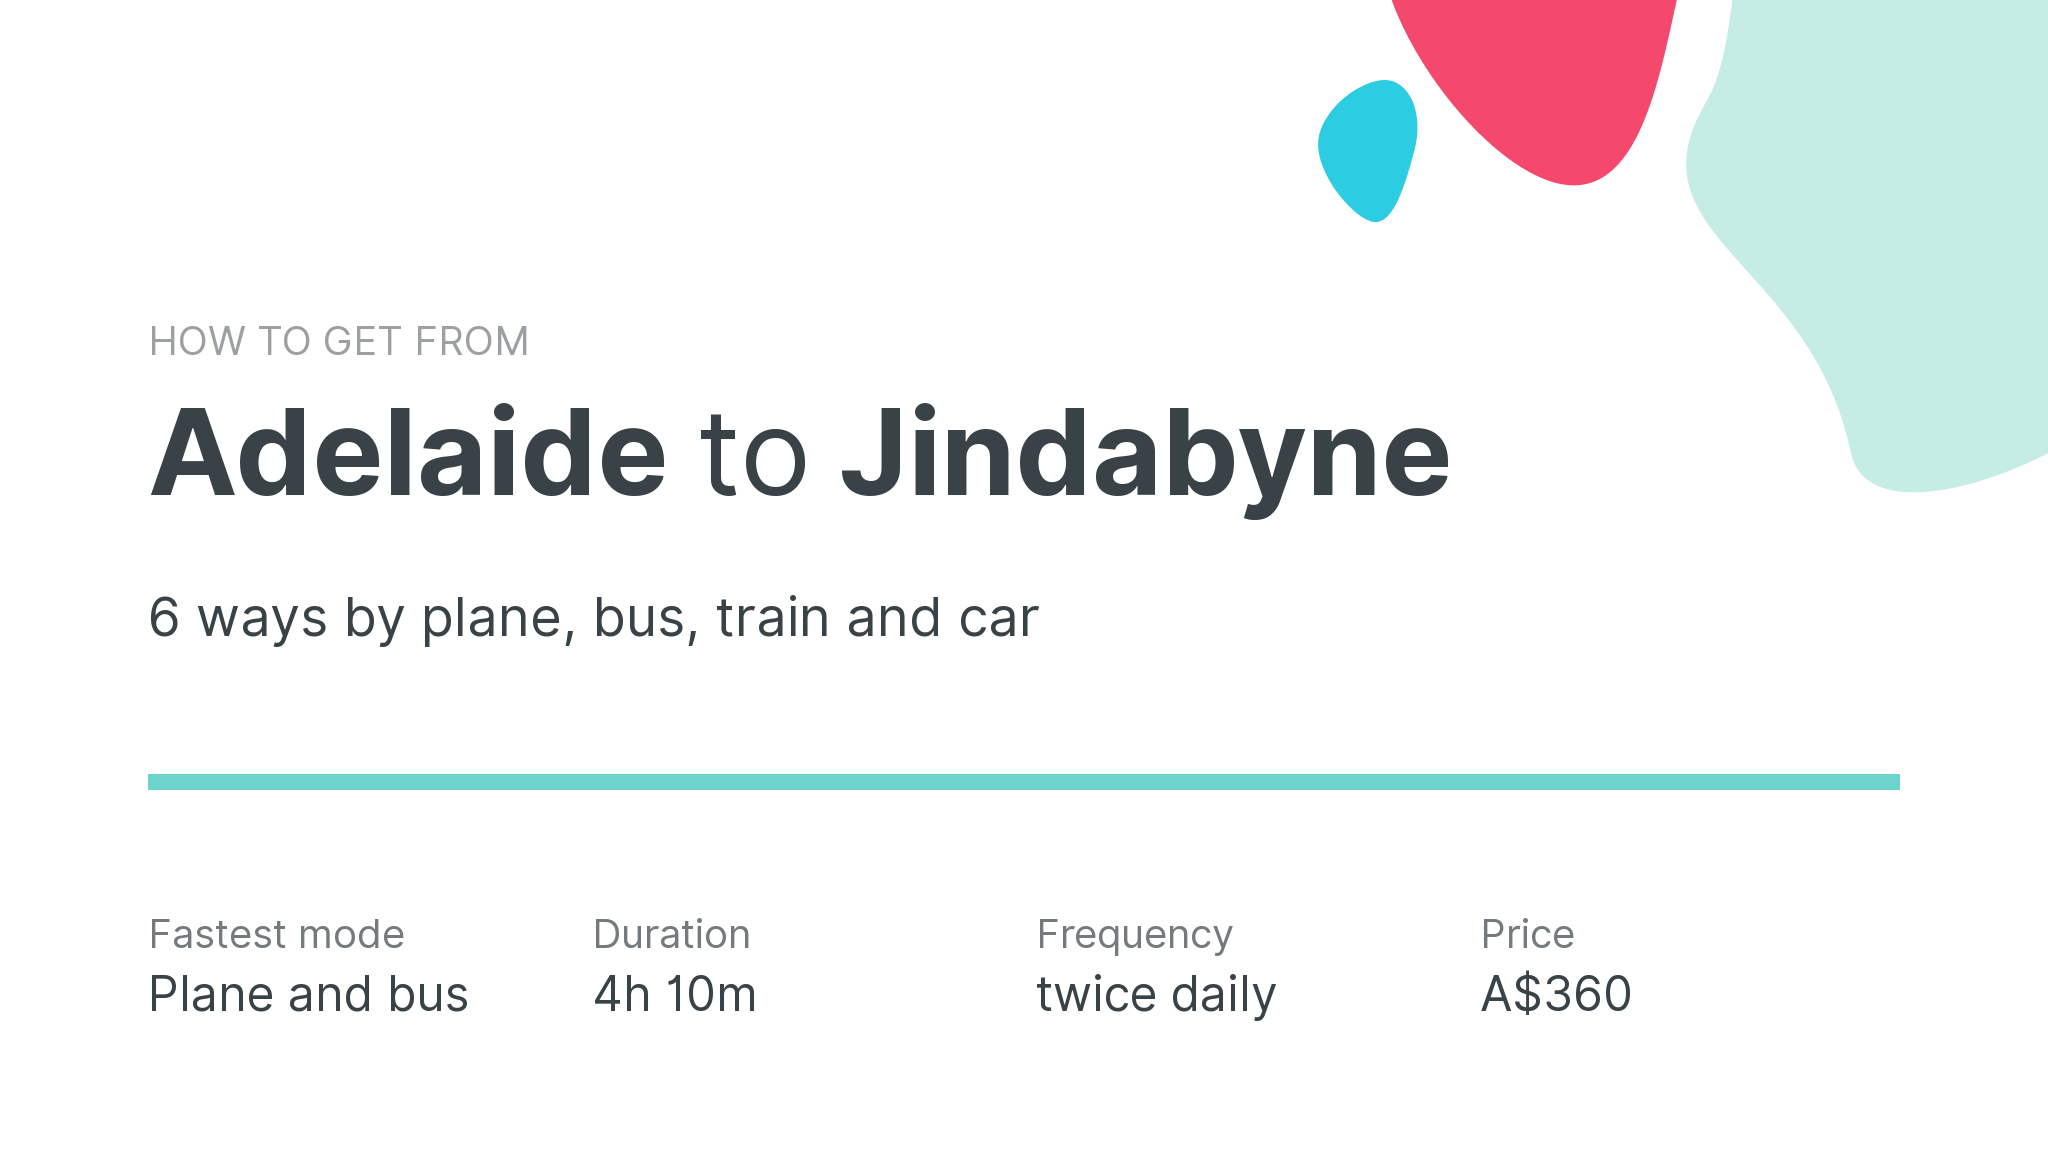 How do I get from Adelaide to Jindabyne